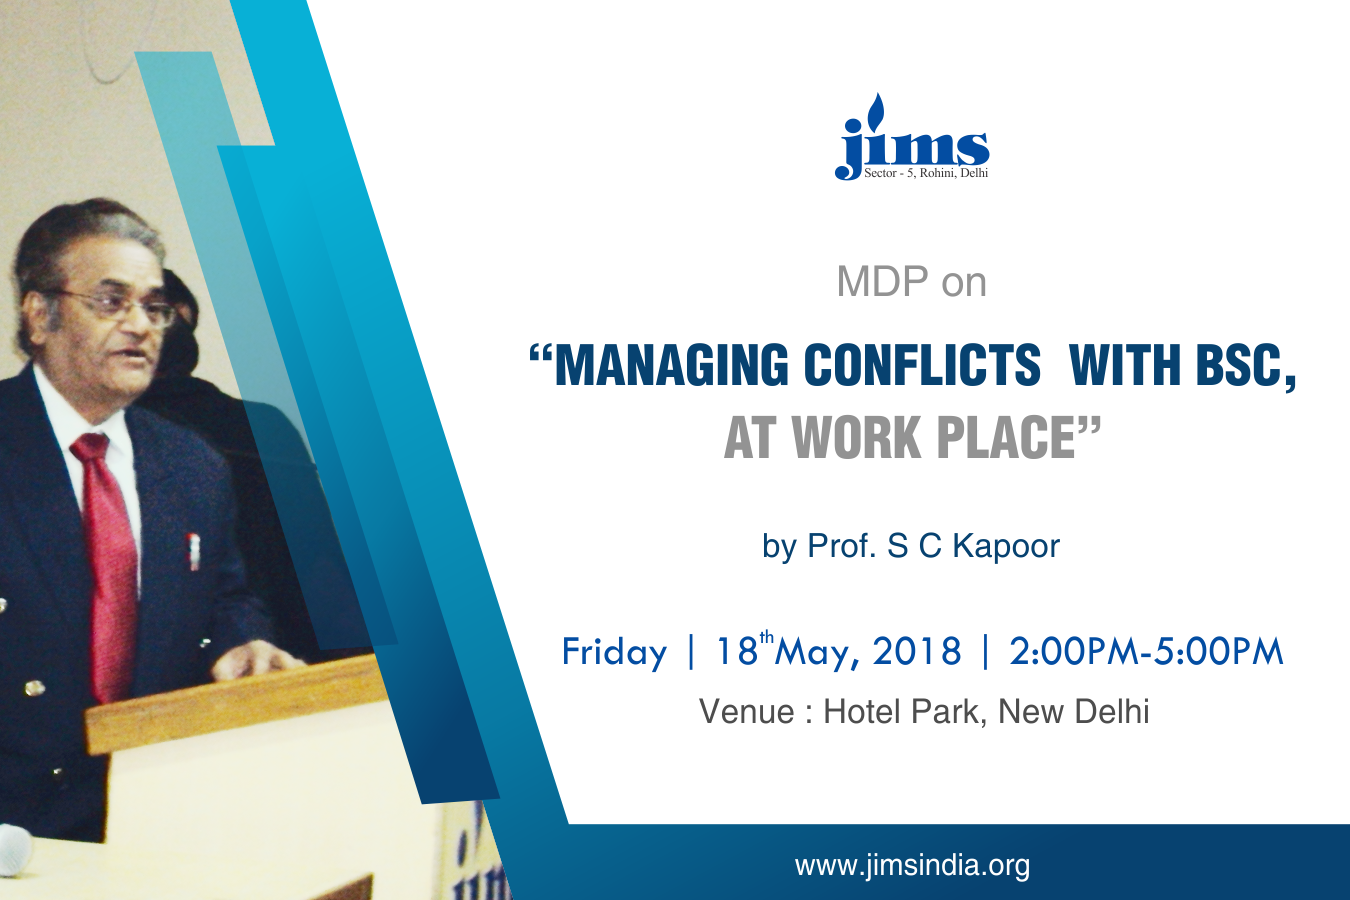 MDP on MANAGING CONFLICTS WITH BSC AT WORK PLACE by  Prof. S. C. Kapoor